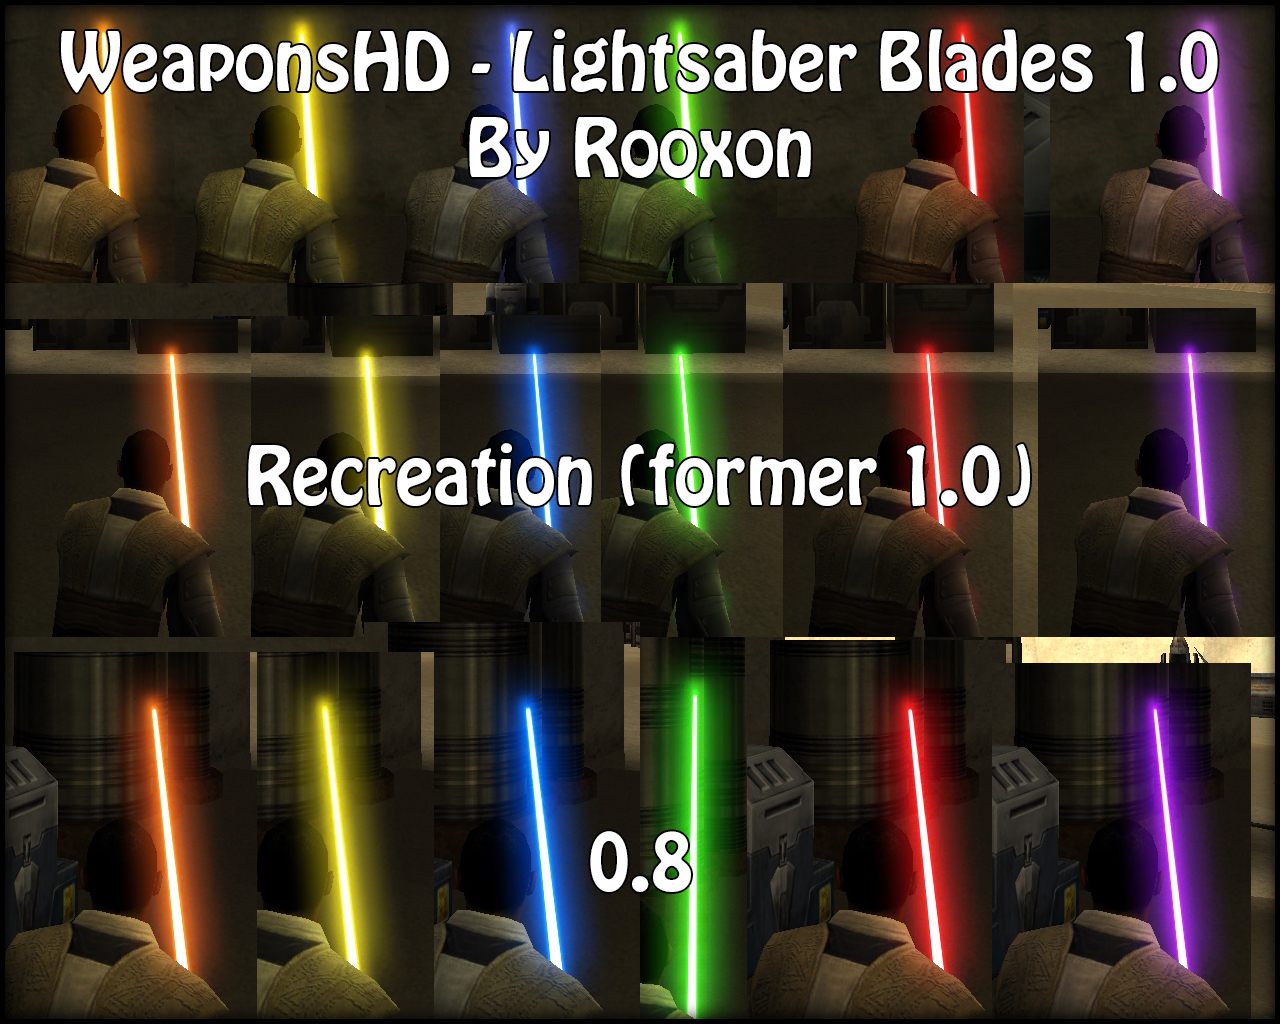 More information about "WeaponsHD - Lightsaber Blades"